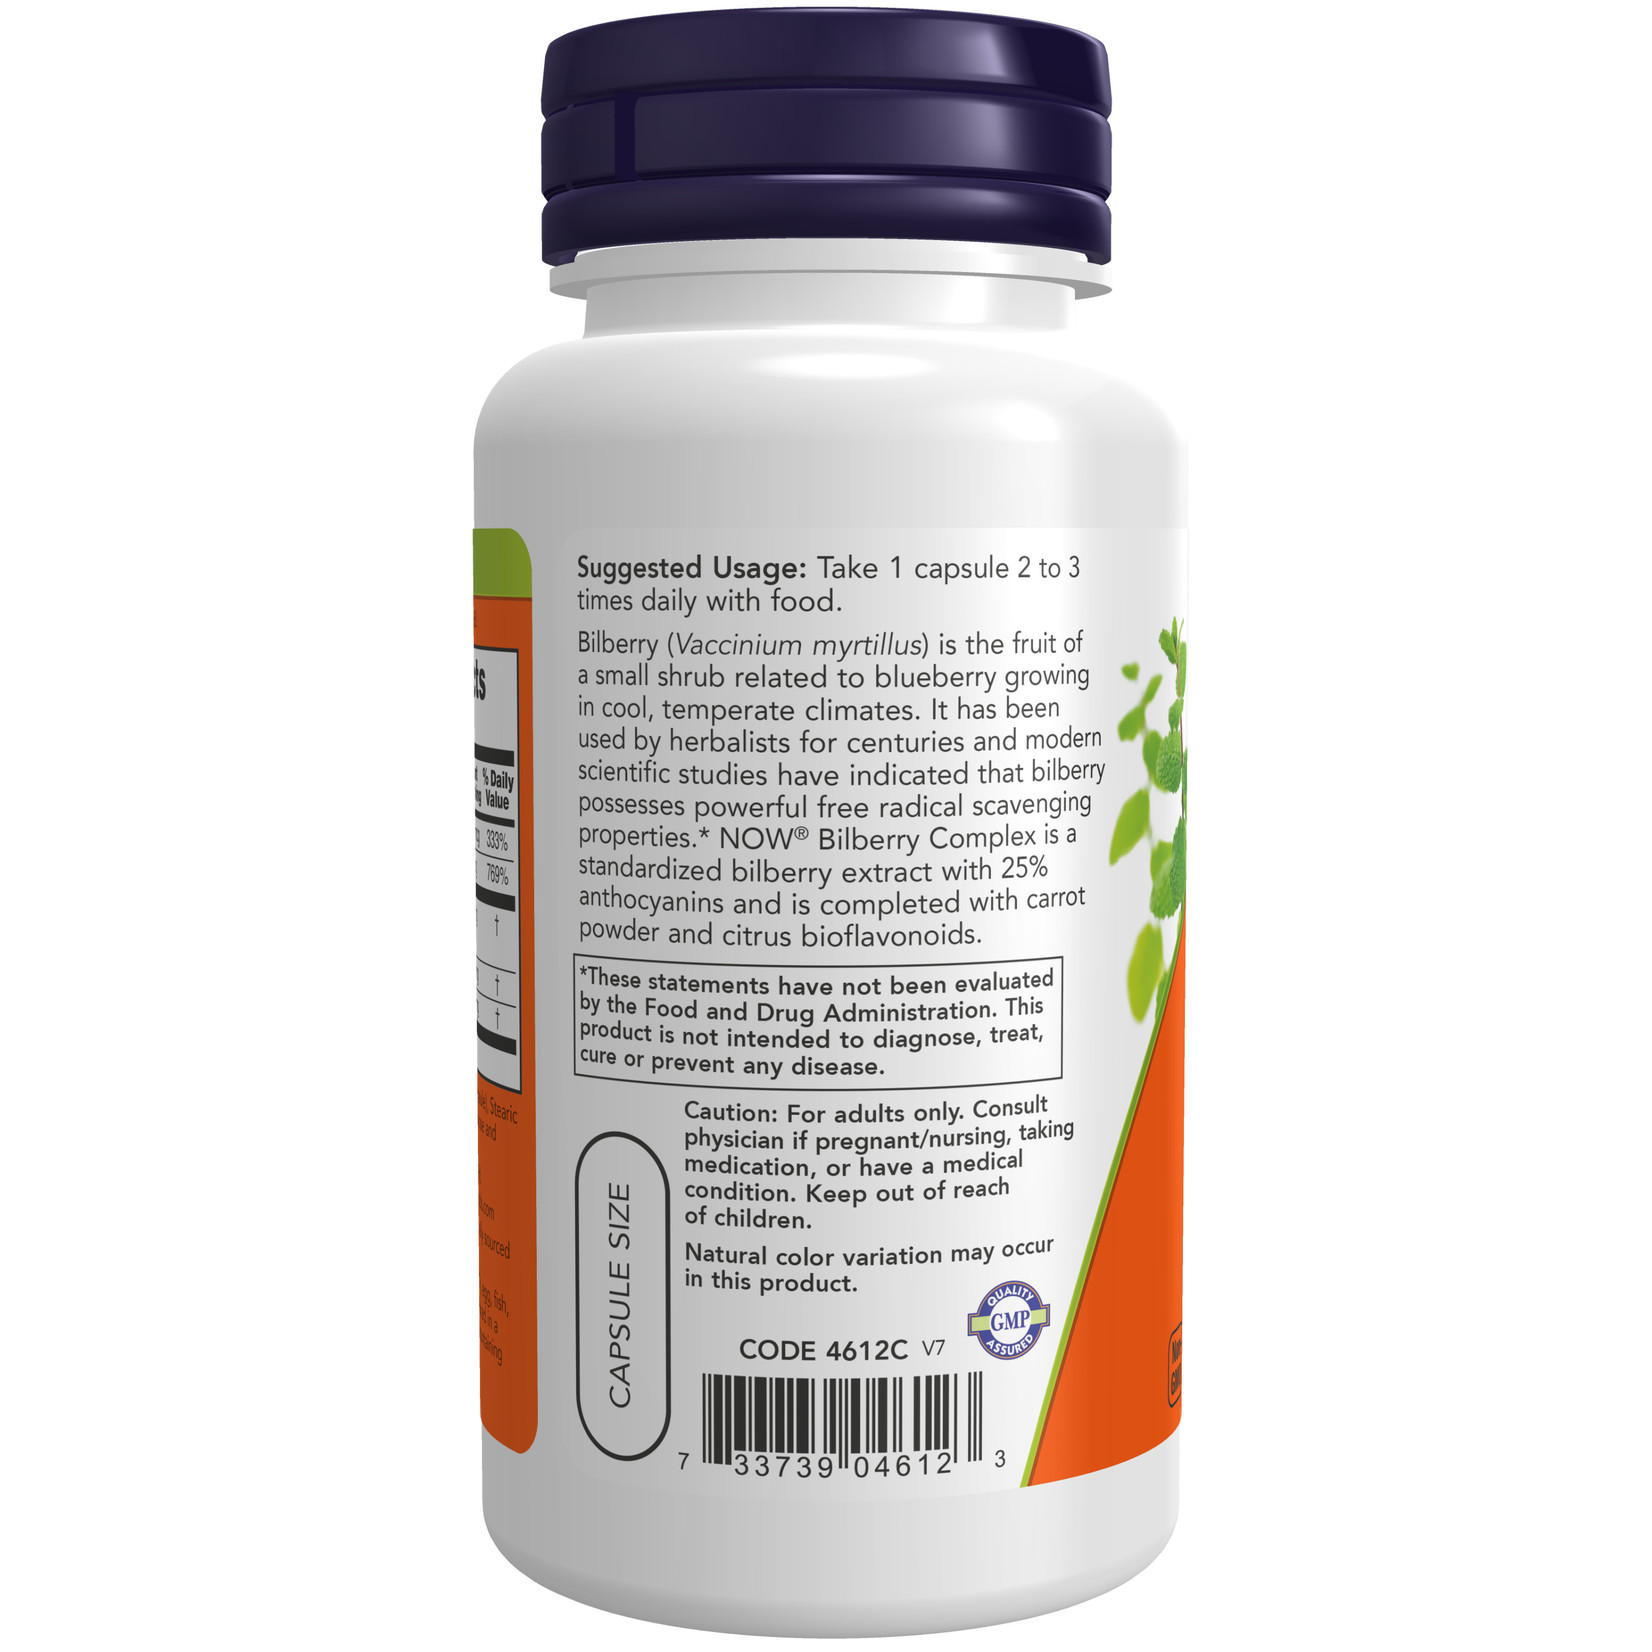 Now Now - Bilberry Complex 80 mg - 100 Capsules